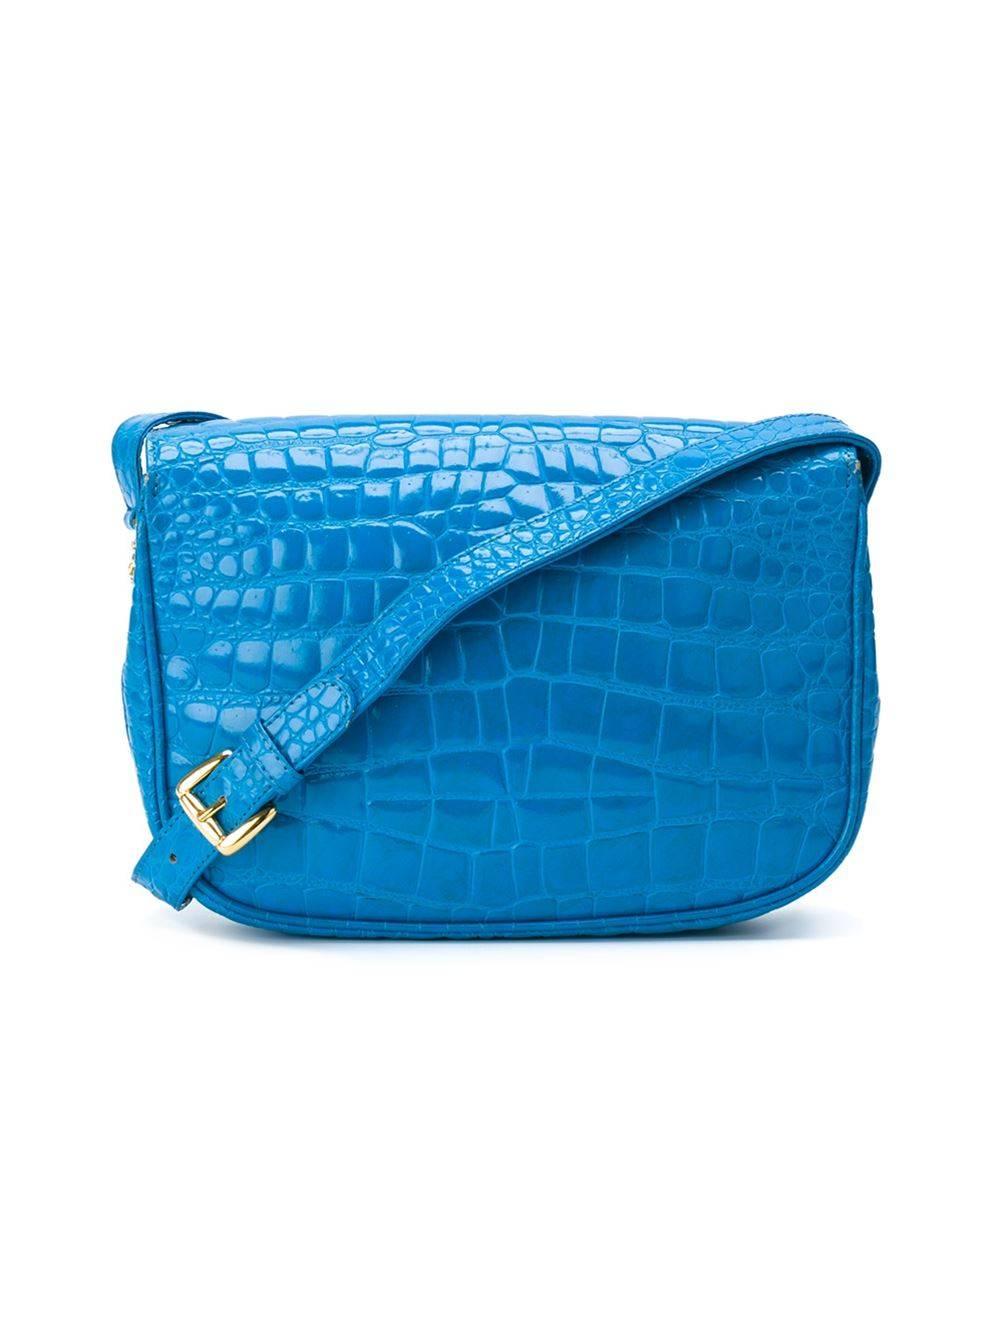 Splendid Versace cerulean blue and gold-tone crocodile print leather flap shoulder bag. It features a foldover top with magnetic closure, an adjustable shoulder strap, an internal zipped pocket and an internal logo patch. The item was produced in